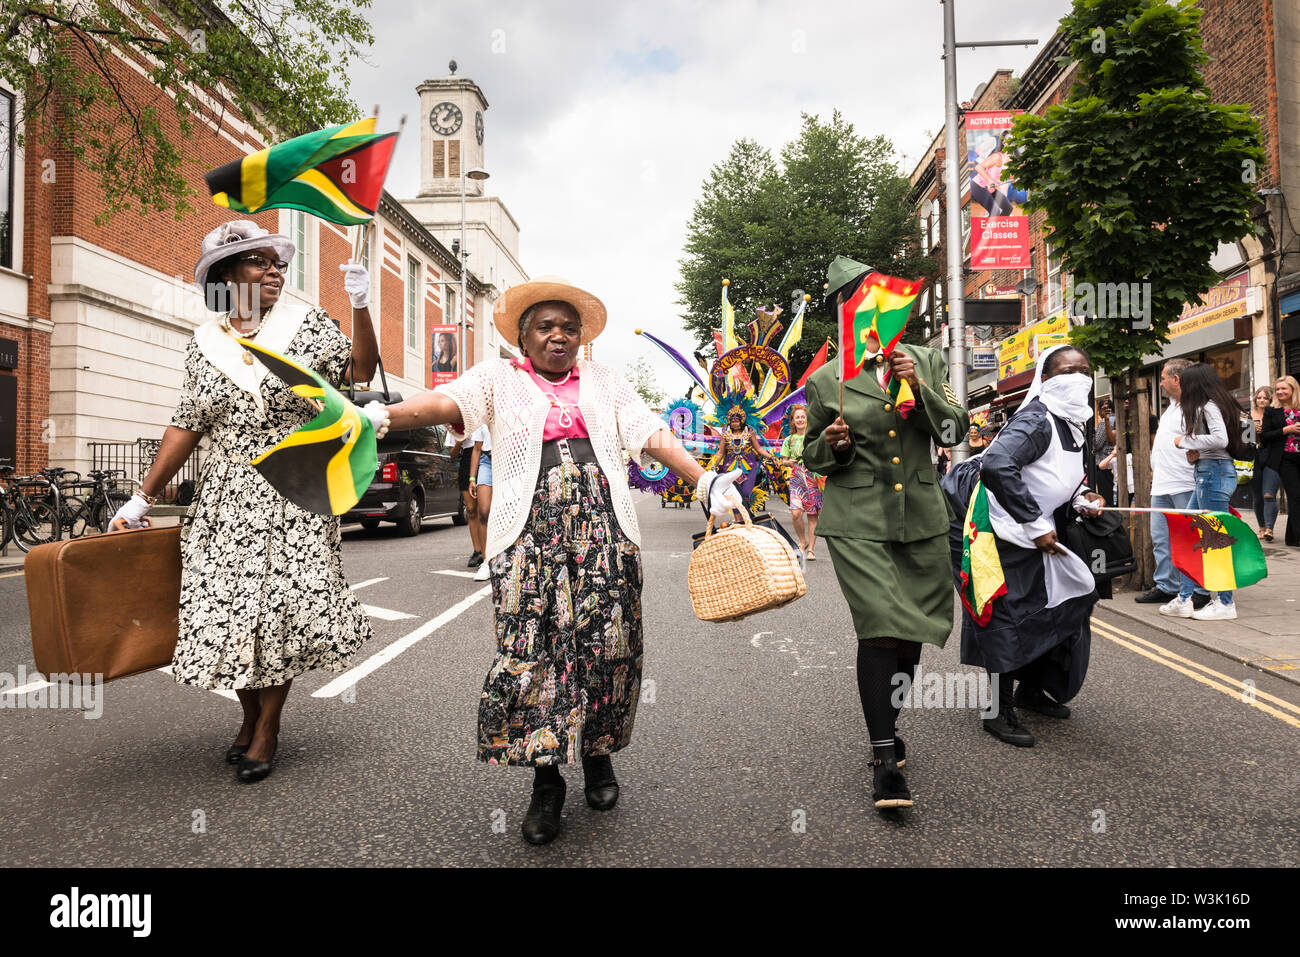 Women dressed to remember the contributions of the Windrush generation taking part in Acton Carnival Parade 2019. Acton Town Hall in background. Stock Photo